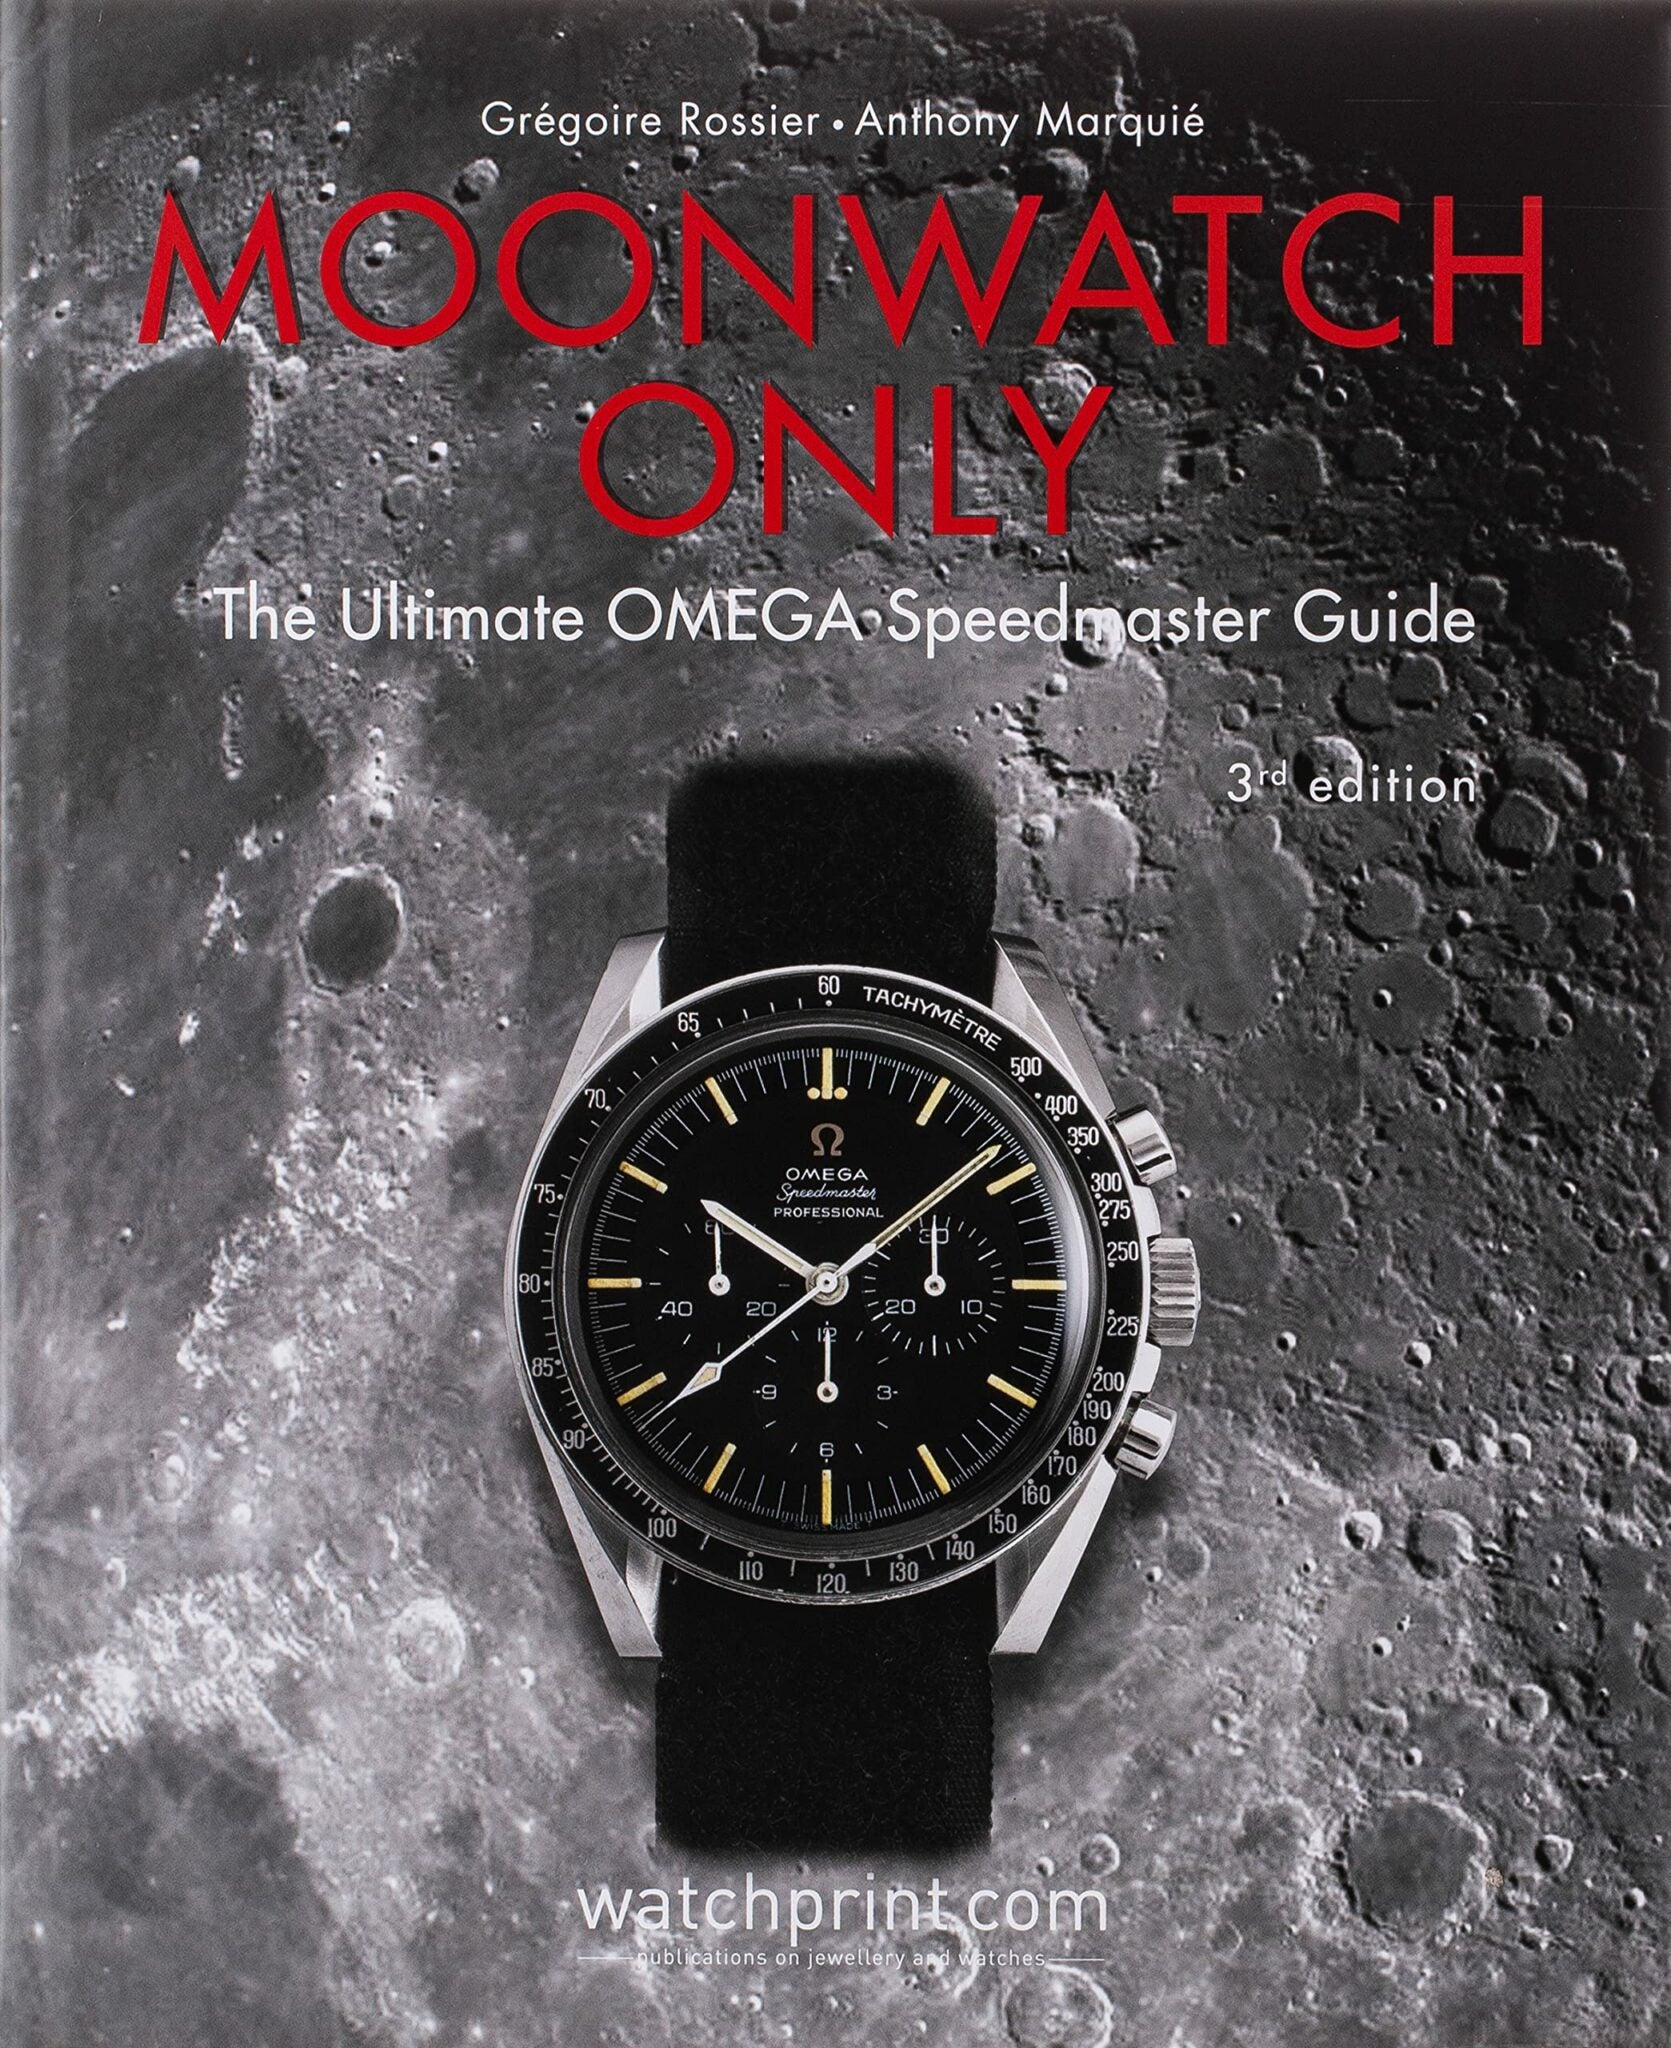 Moonwatch Only